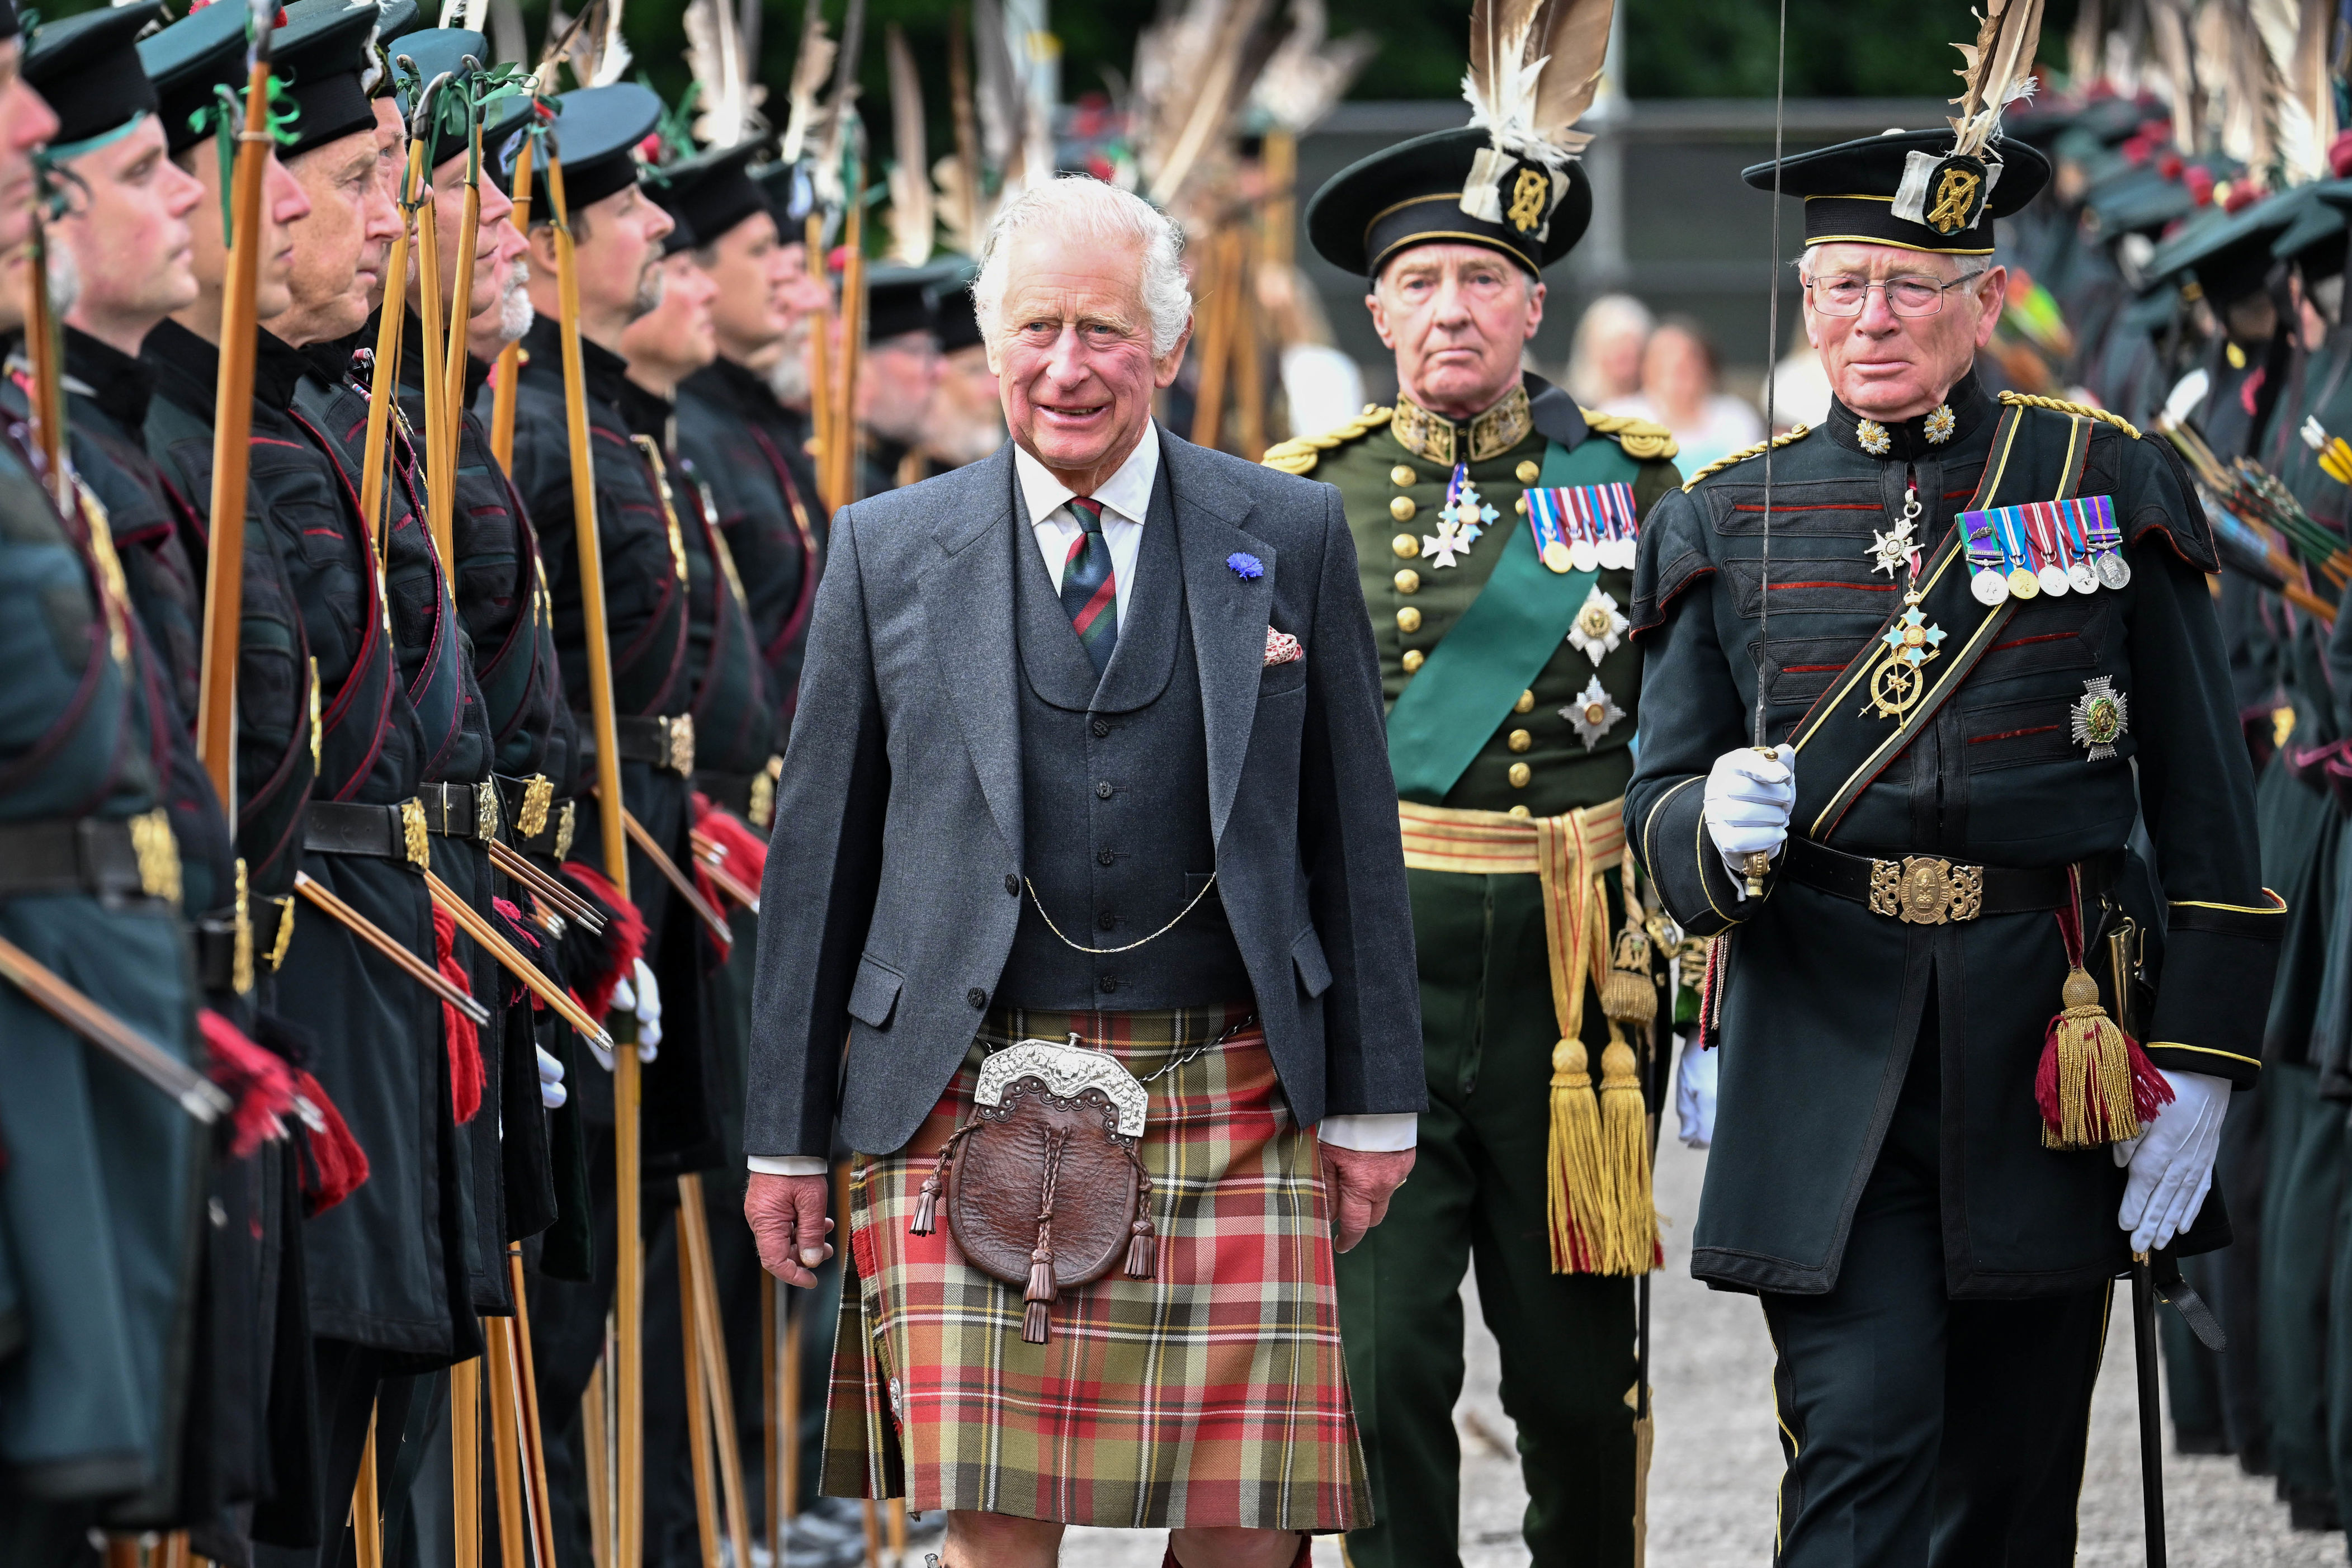 <p>King Charles III attends the Ceremony of the Keys at the Palace of Holyroodhouse in Edinburgh, Scotland, on July 3, 2023, to kick off his family's Royal Week in Scotland.</p>